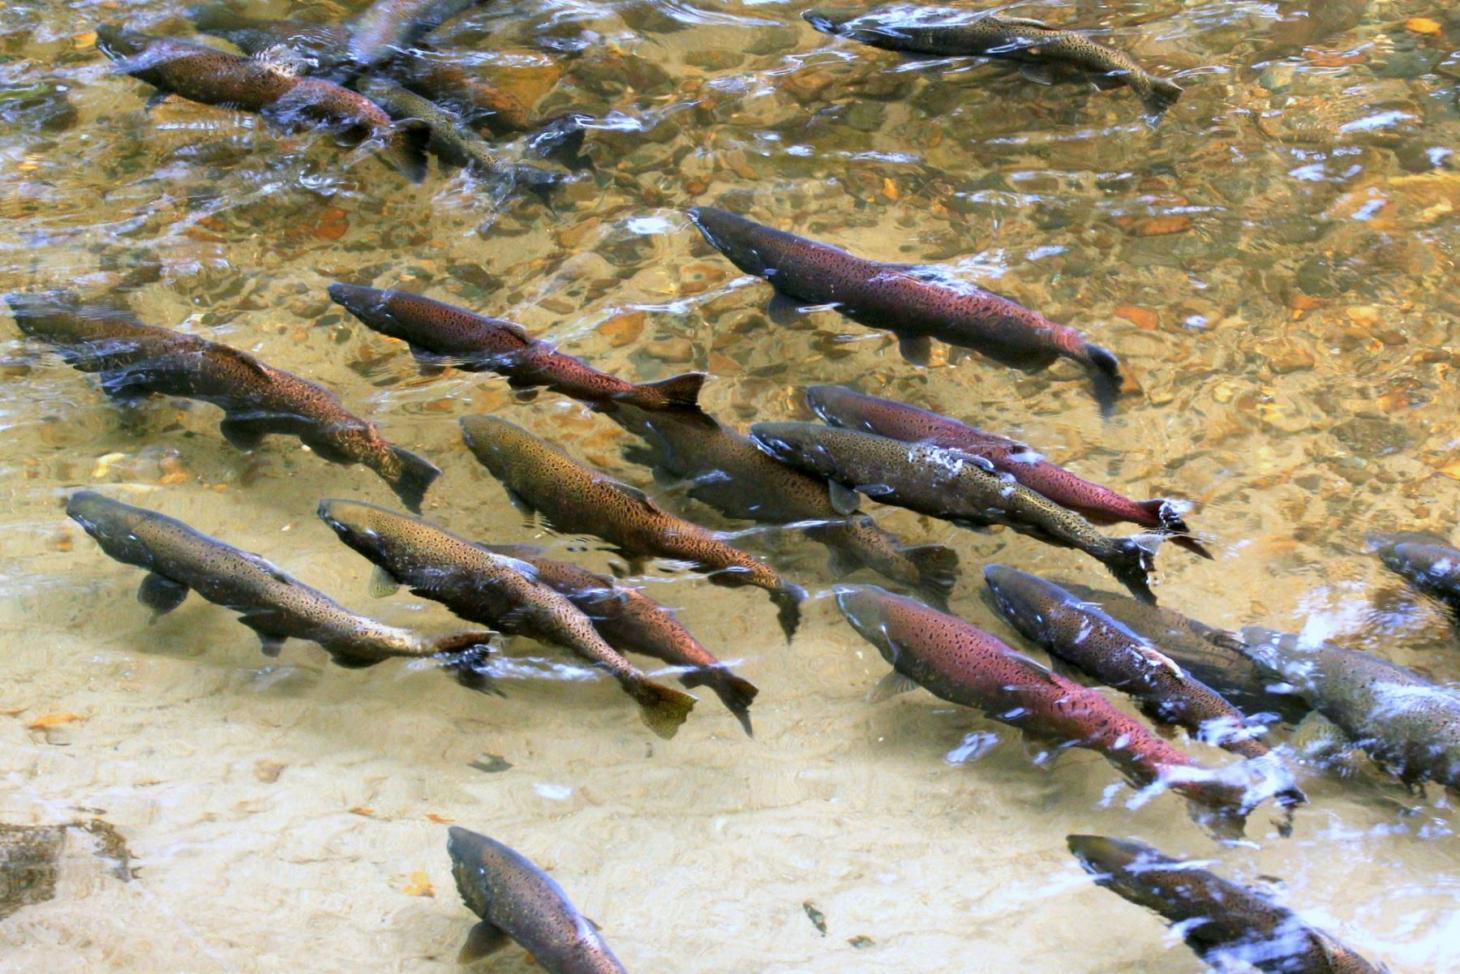 Chinook salmon spawning in a river in the Pacific Northwest. Photo from iStock